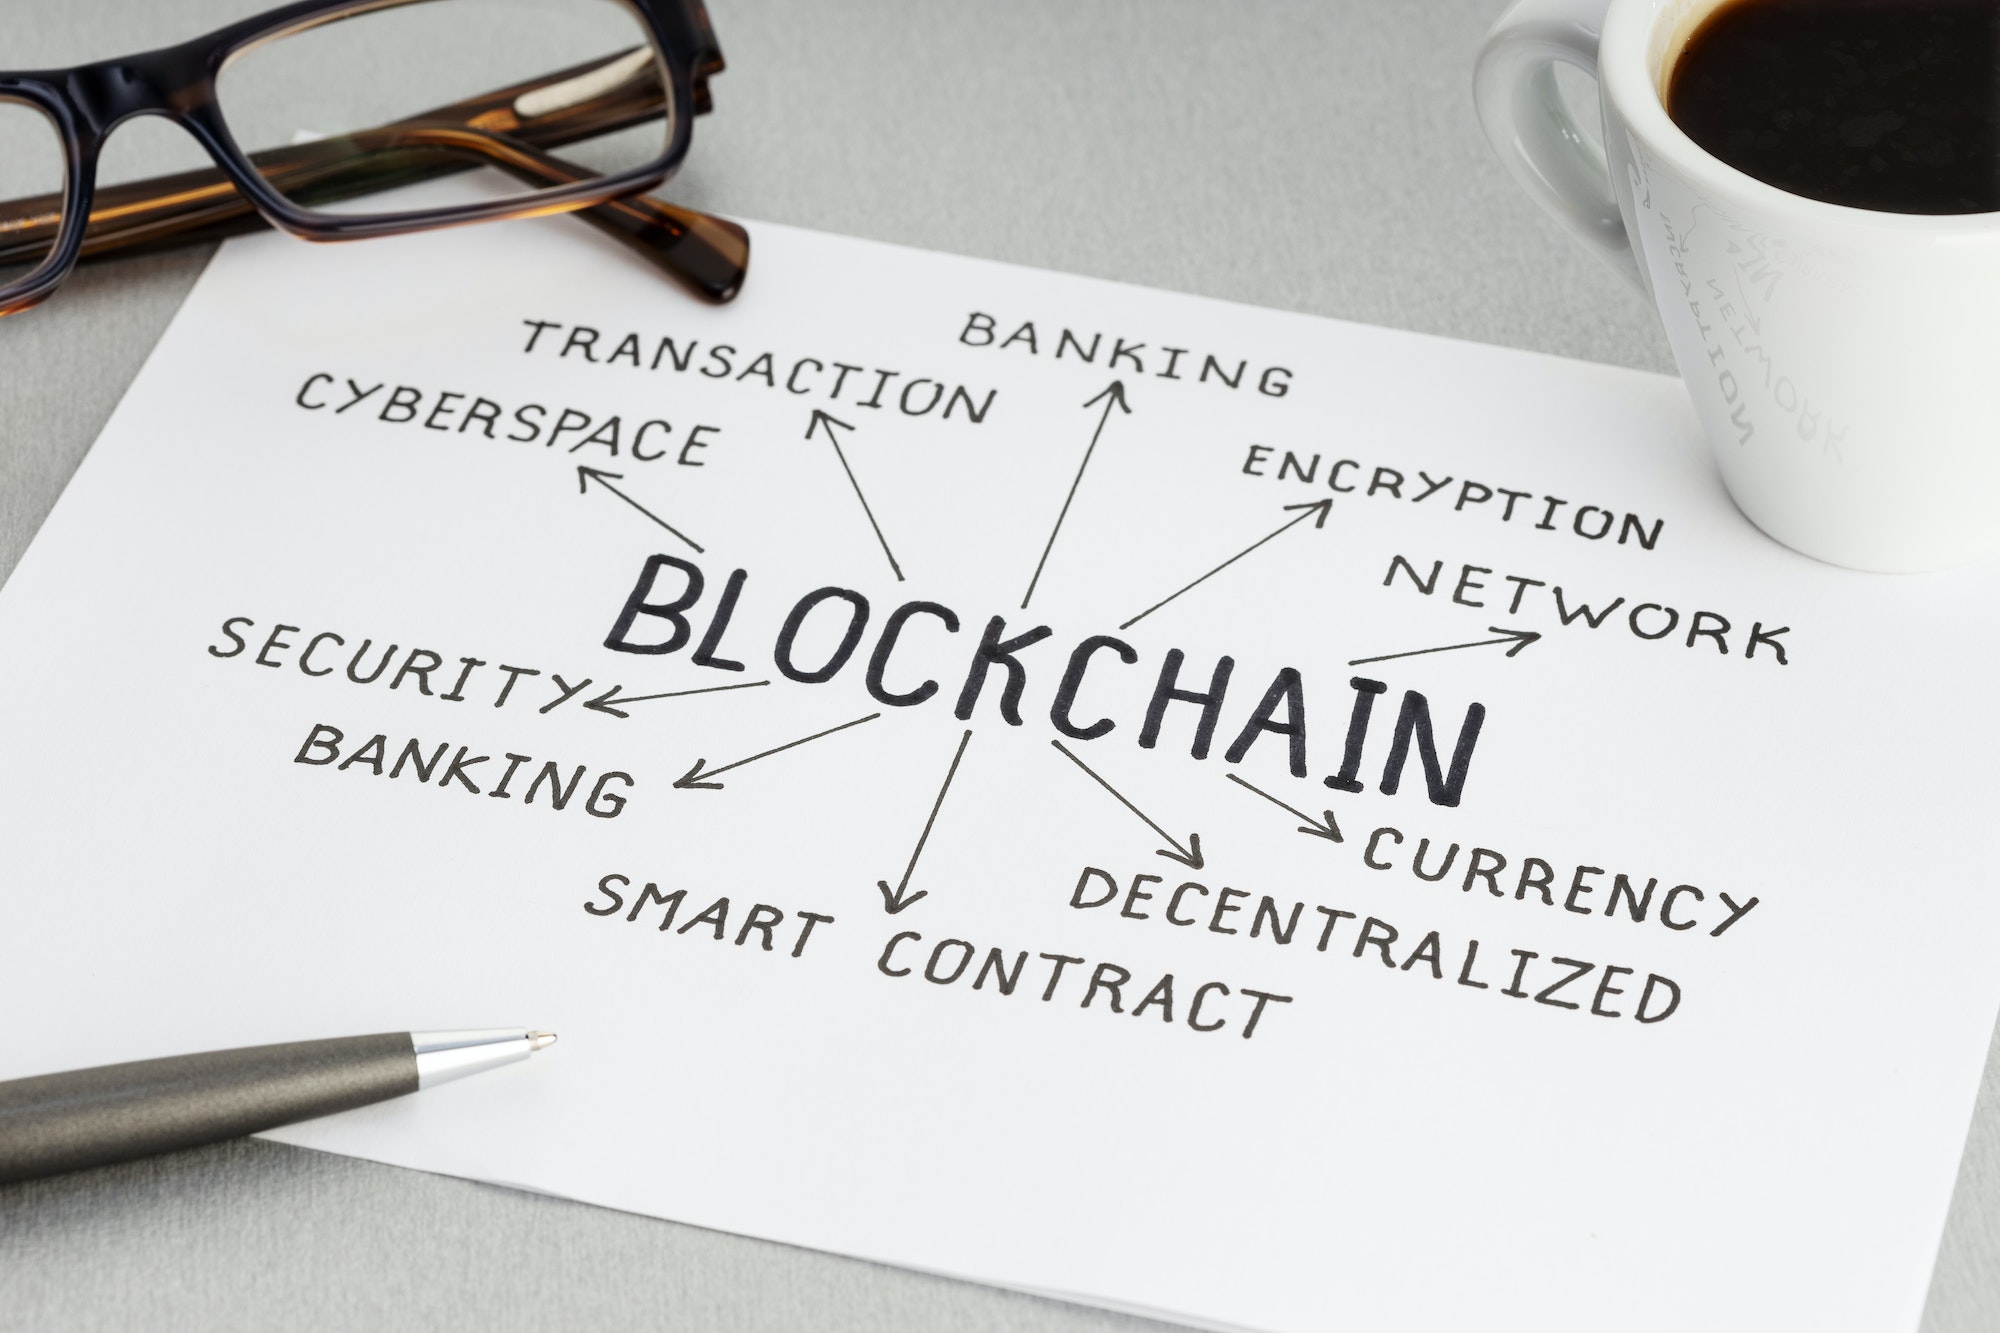 Blockchain transforming the financial industry